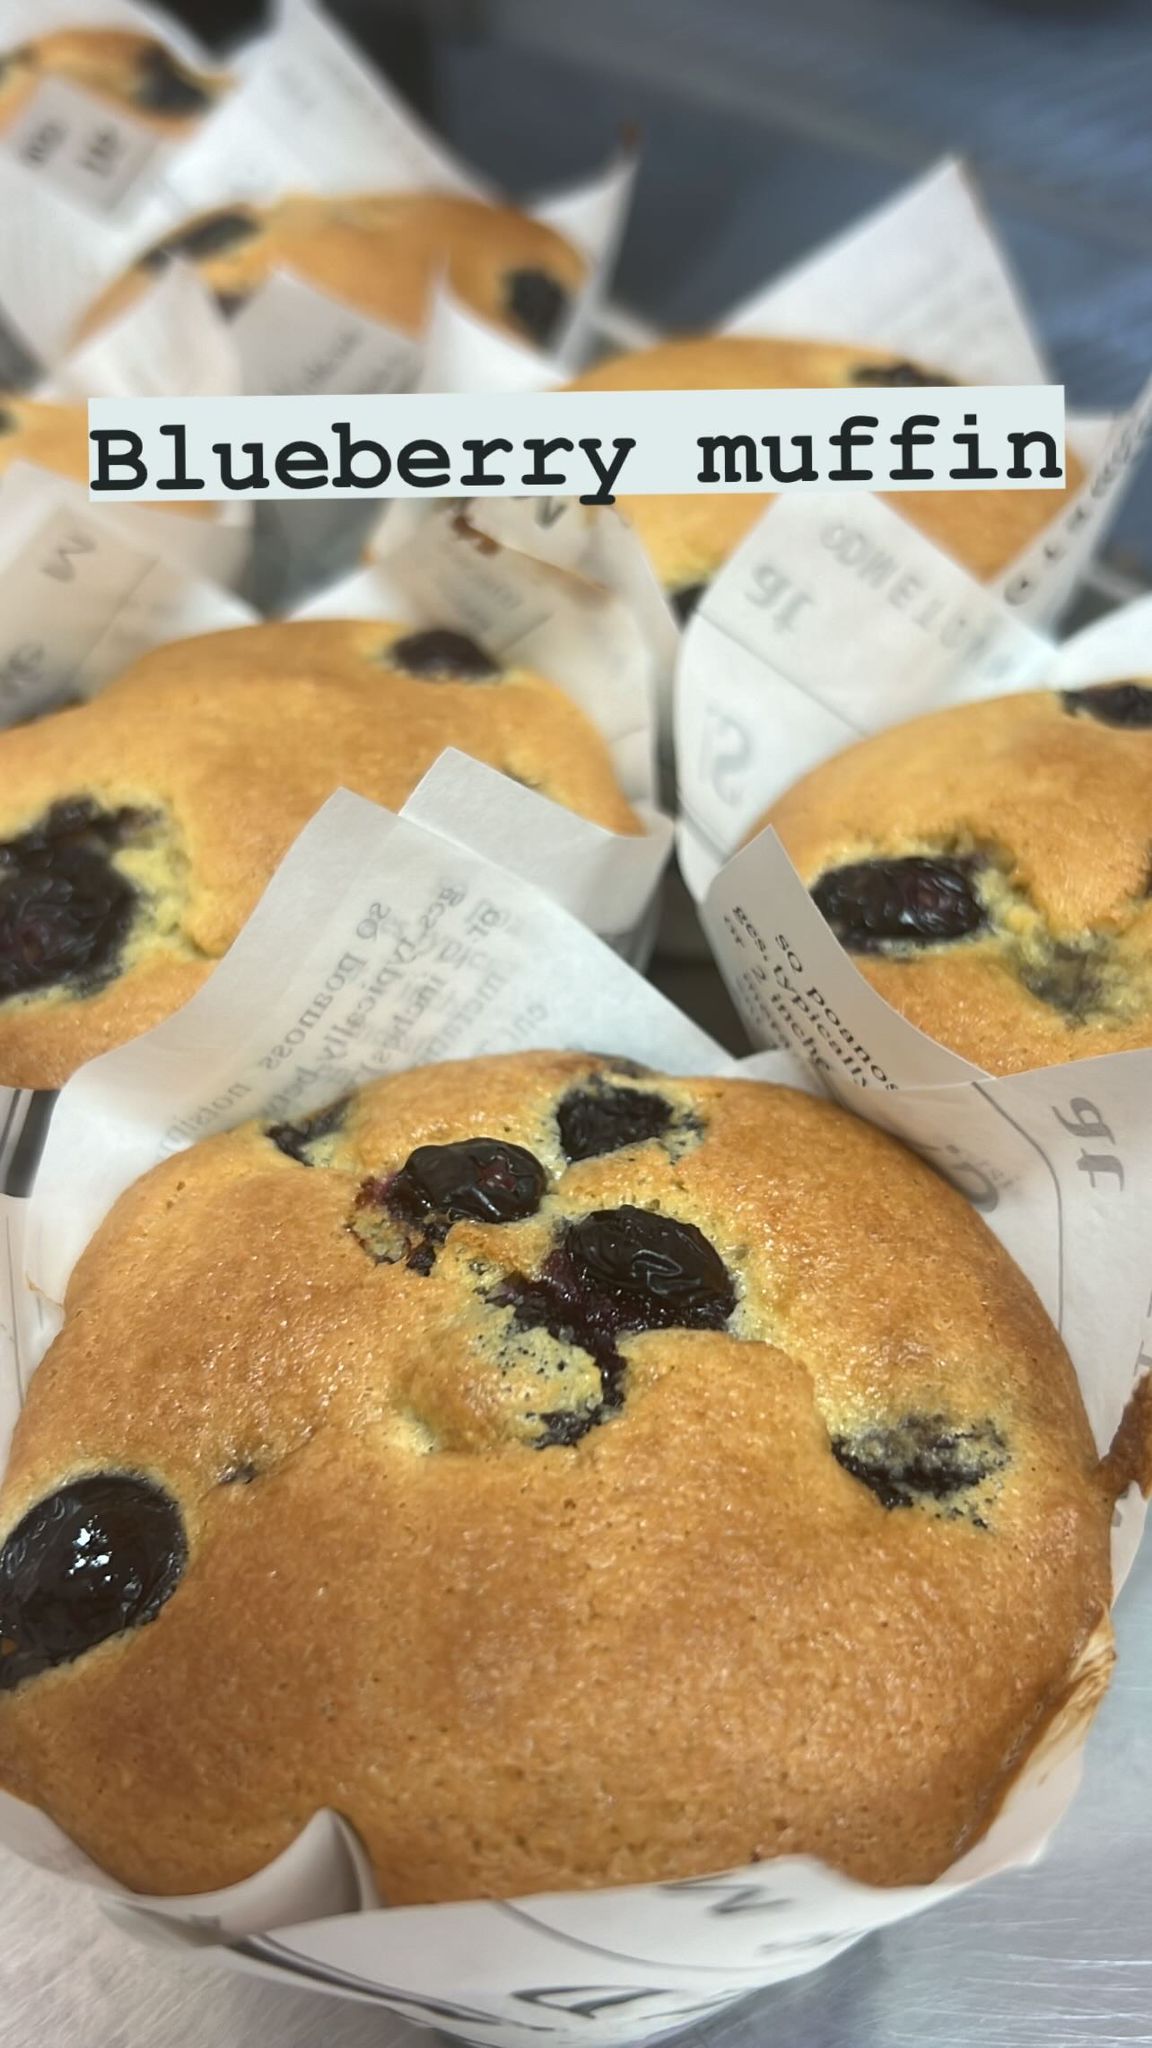 Blueberry Muffin GF 4 Pack!